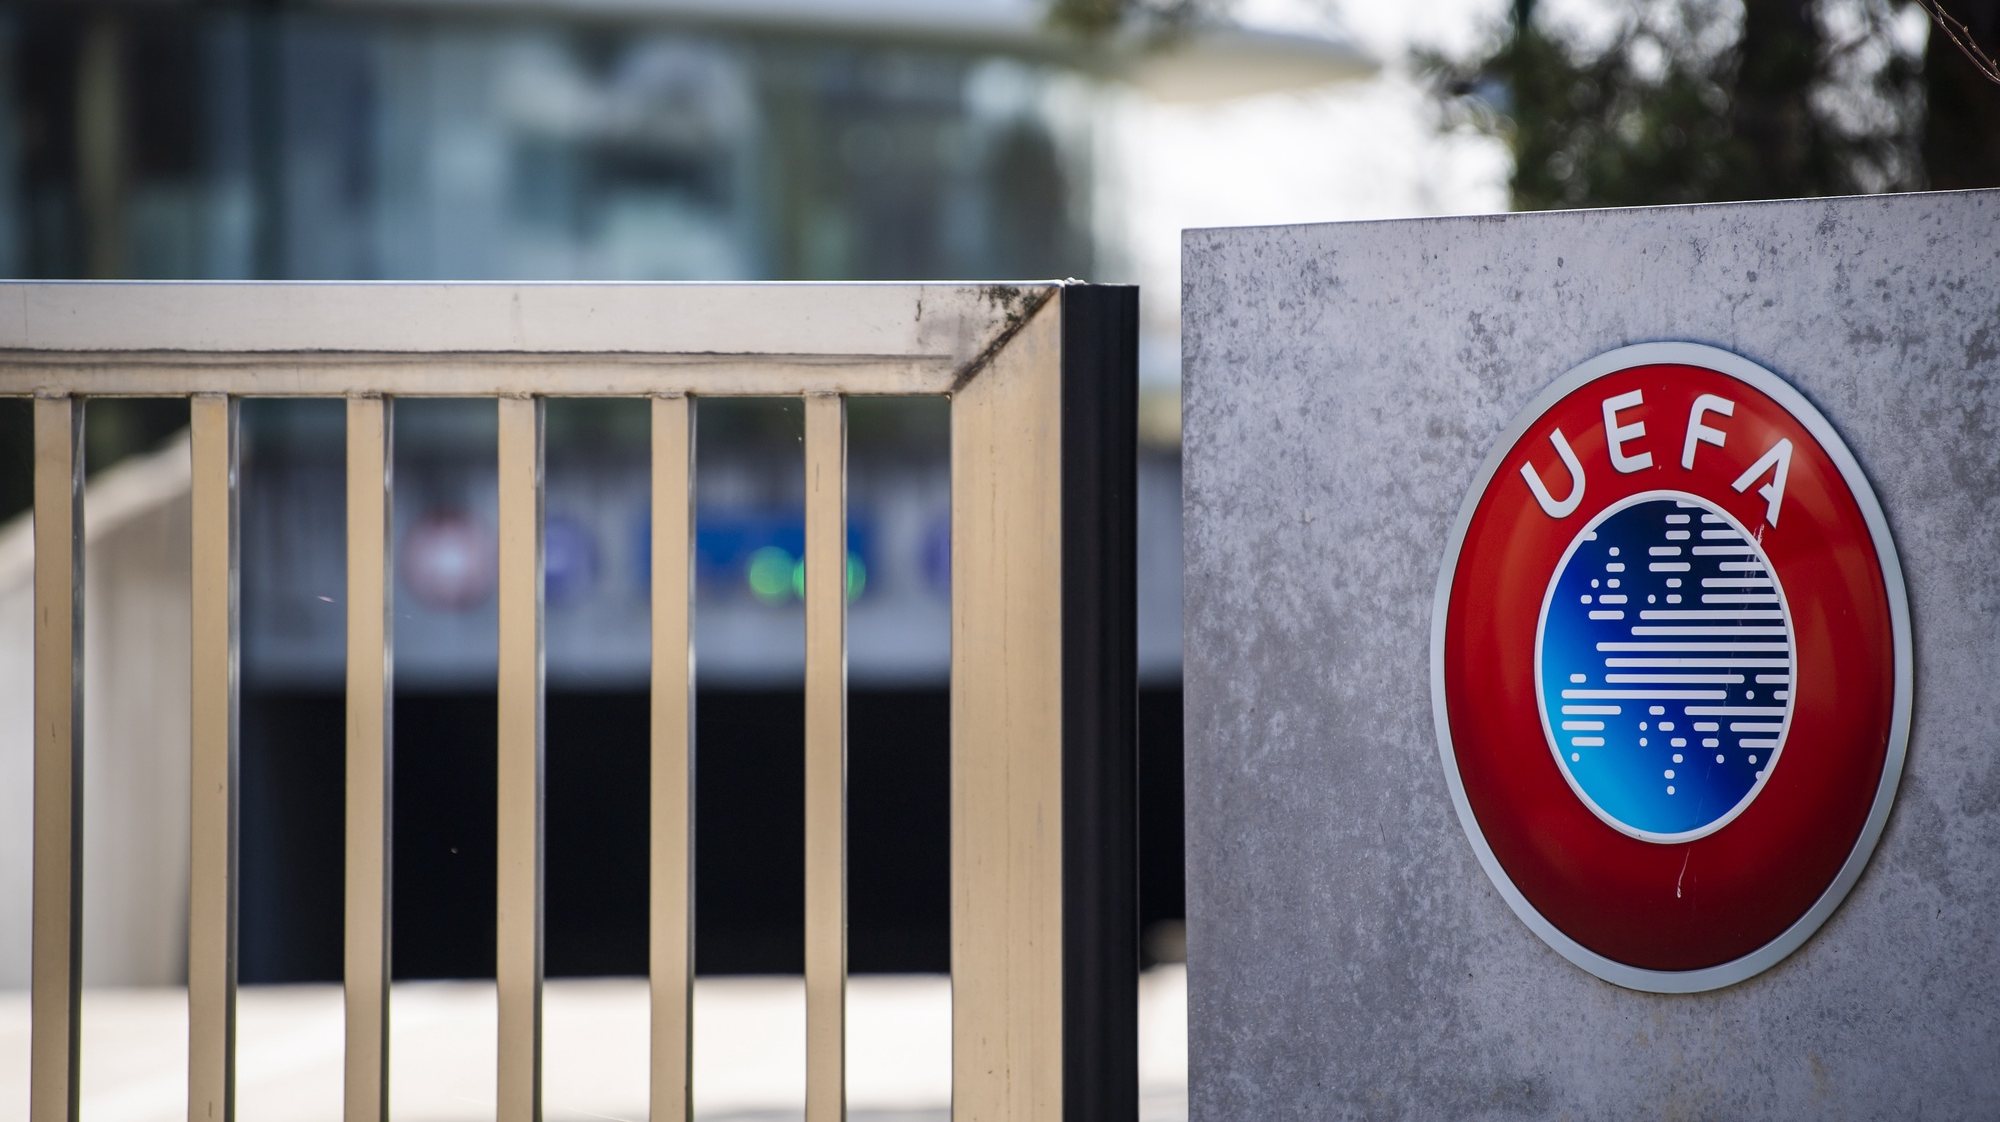 epa08337221 (FILE) - The UEFA logo is pictured at the entrance of the UEFA headquarters in Nyon, Switzerland, 17 March 2020 (re-issued on 01 April 2020). The UEFA has postponed on 01 April all planned matches of the national team&#039;s in June until further notice. The same applies to Champions and Europa League matches of this season.  EPA/JEAN-CHRISTOPHE BOTT